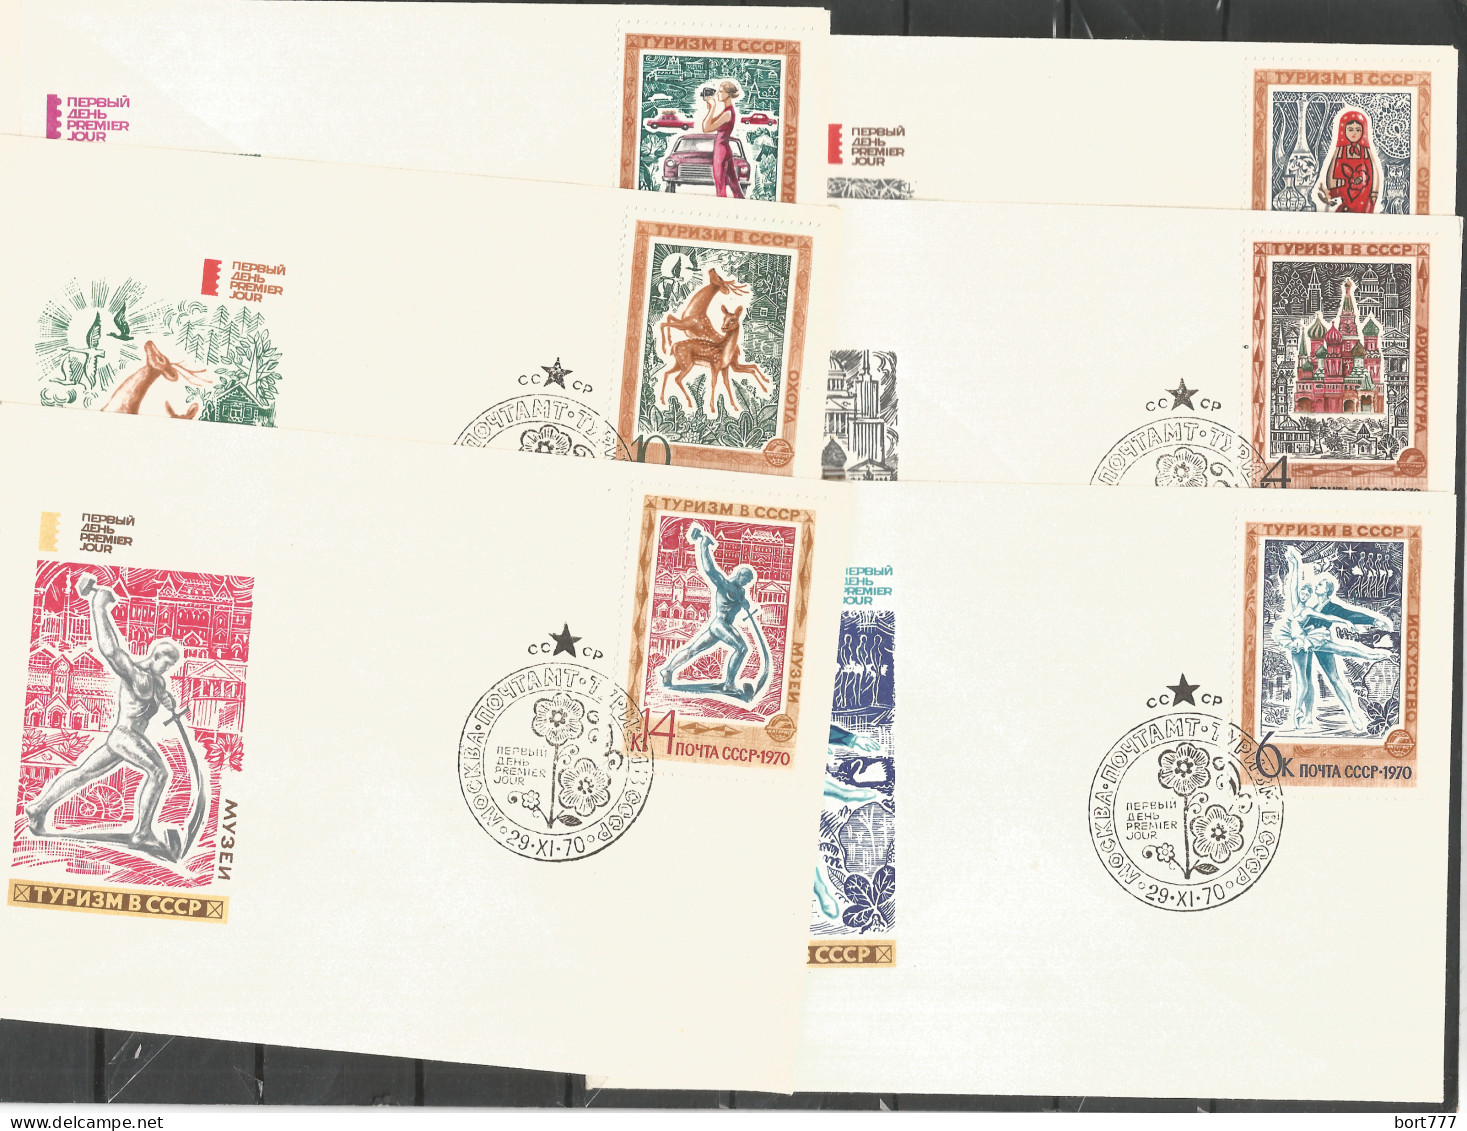 RUSSIA - 6 COVERS FDC - ART 1970 - FDC